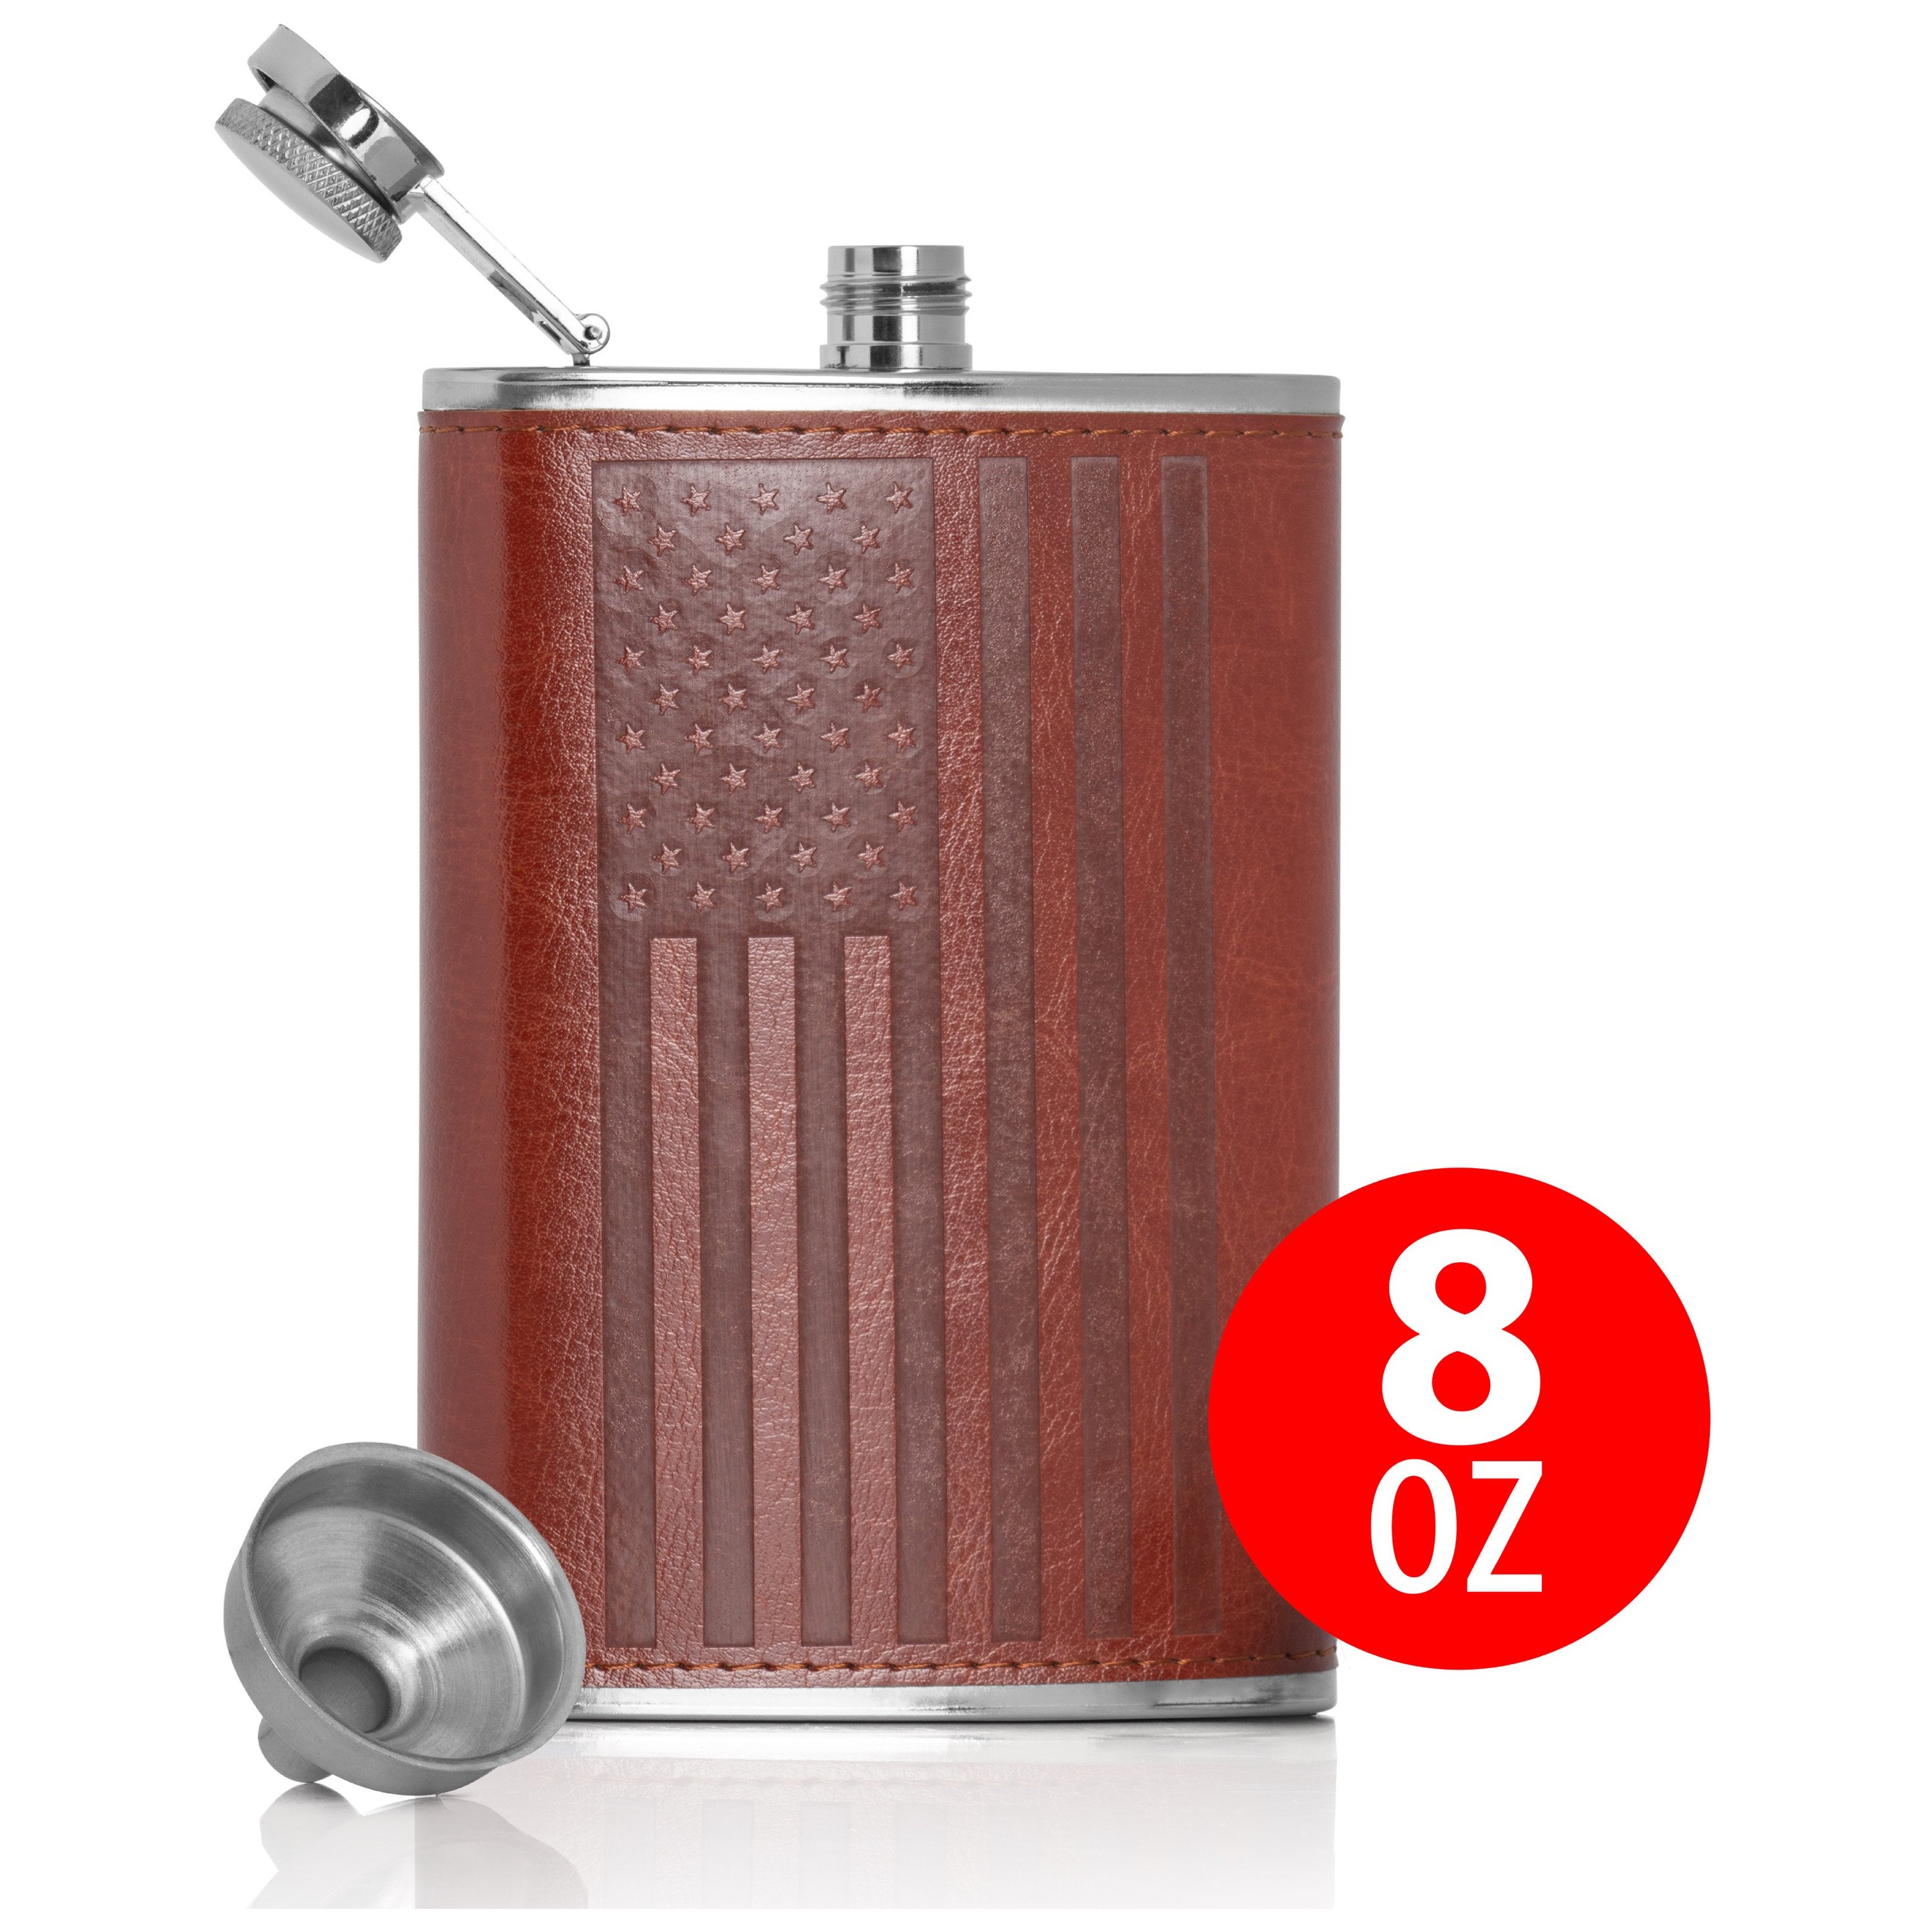 Wholesale 8oz Stainless Steel Flask with Black Wrap - Buy Wholesale Flasks